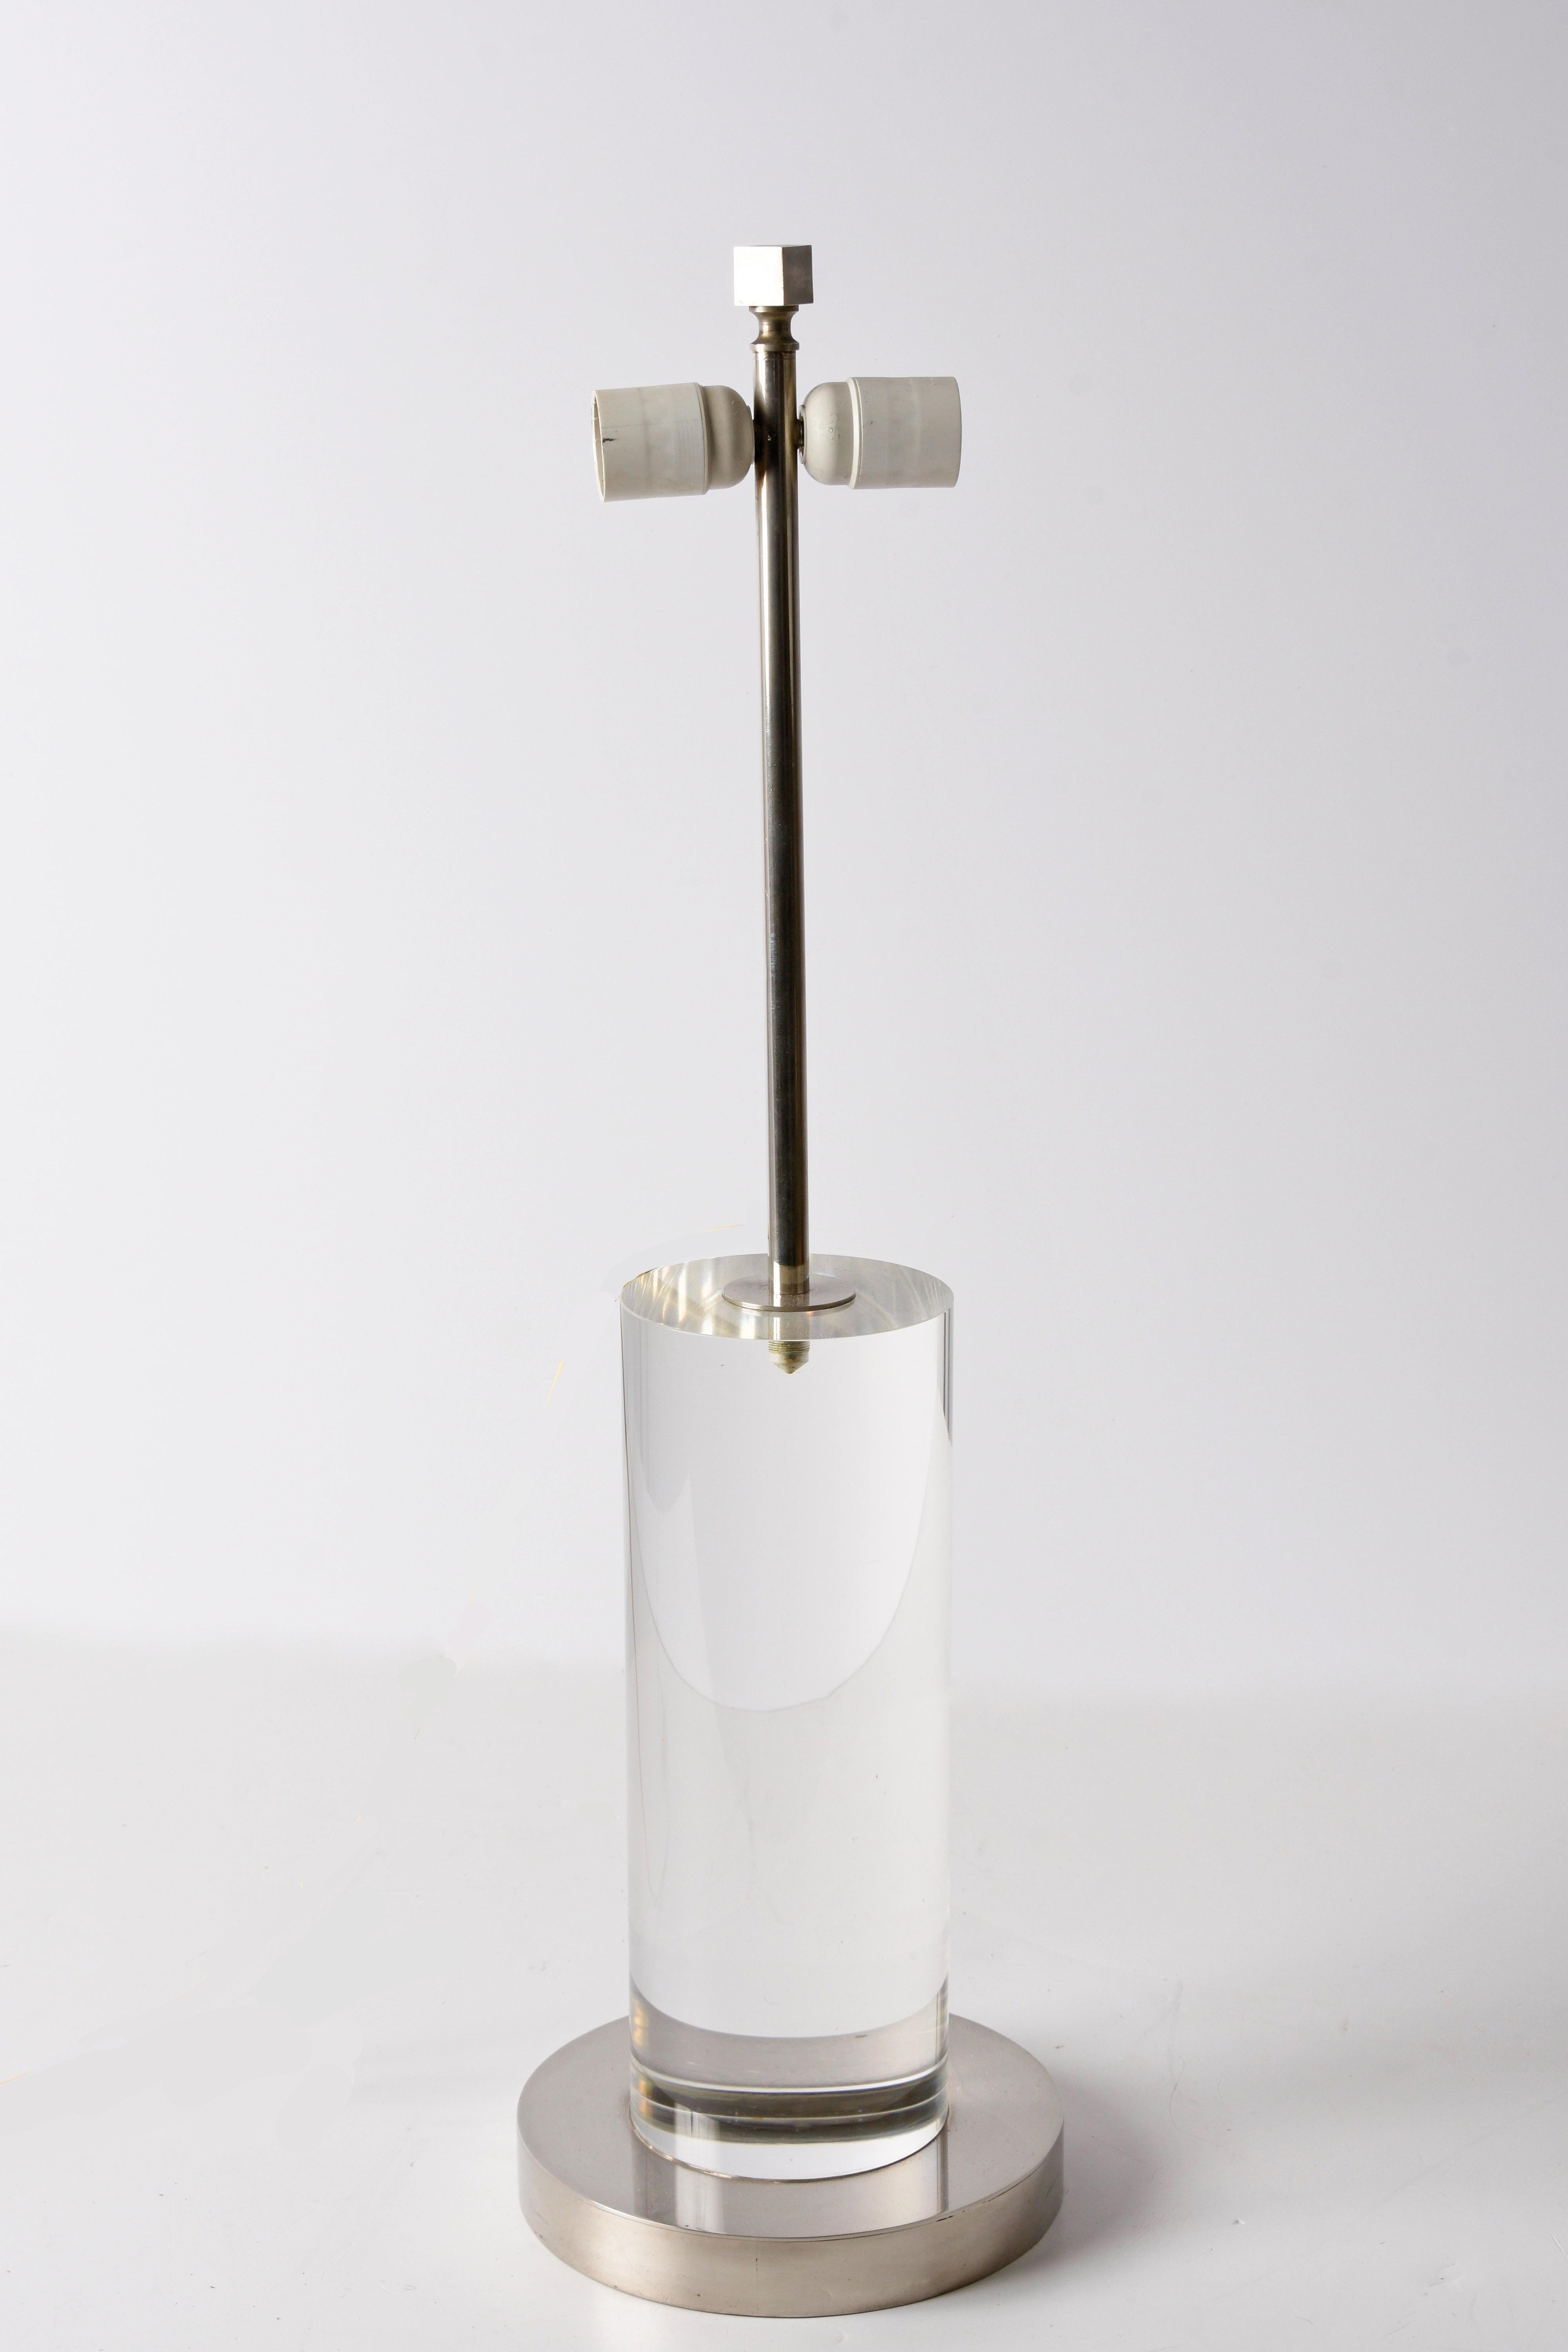 Romeo Rega Midcentury Italian Table Lamp with Lucite Column and Brass Base 1970s For Sale 7